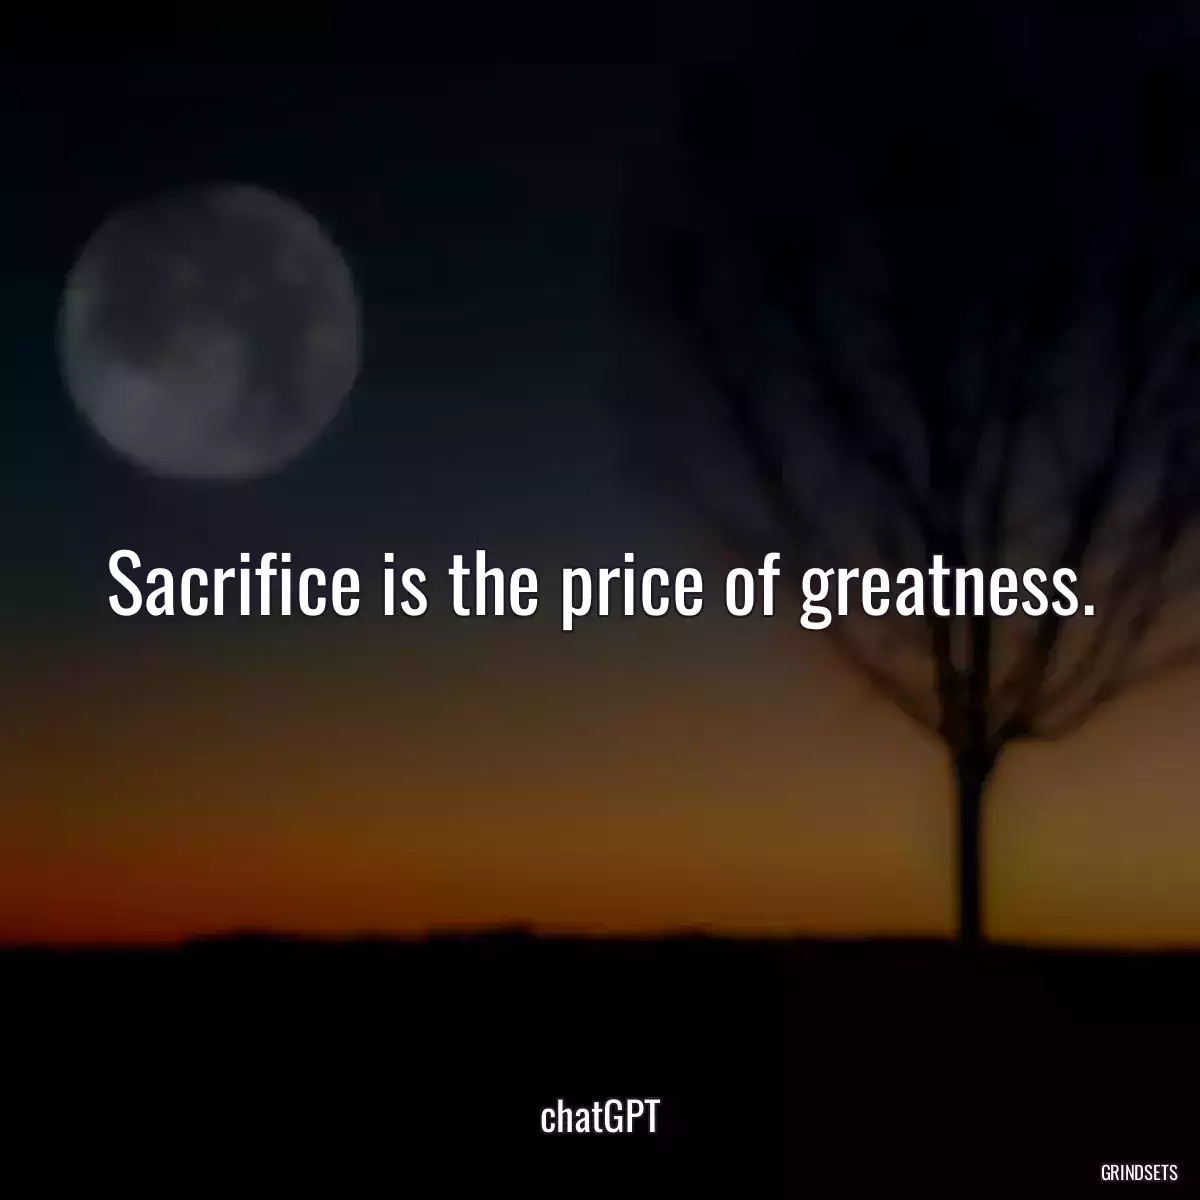 Sacrifice is the price of greatness.